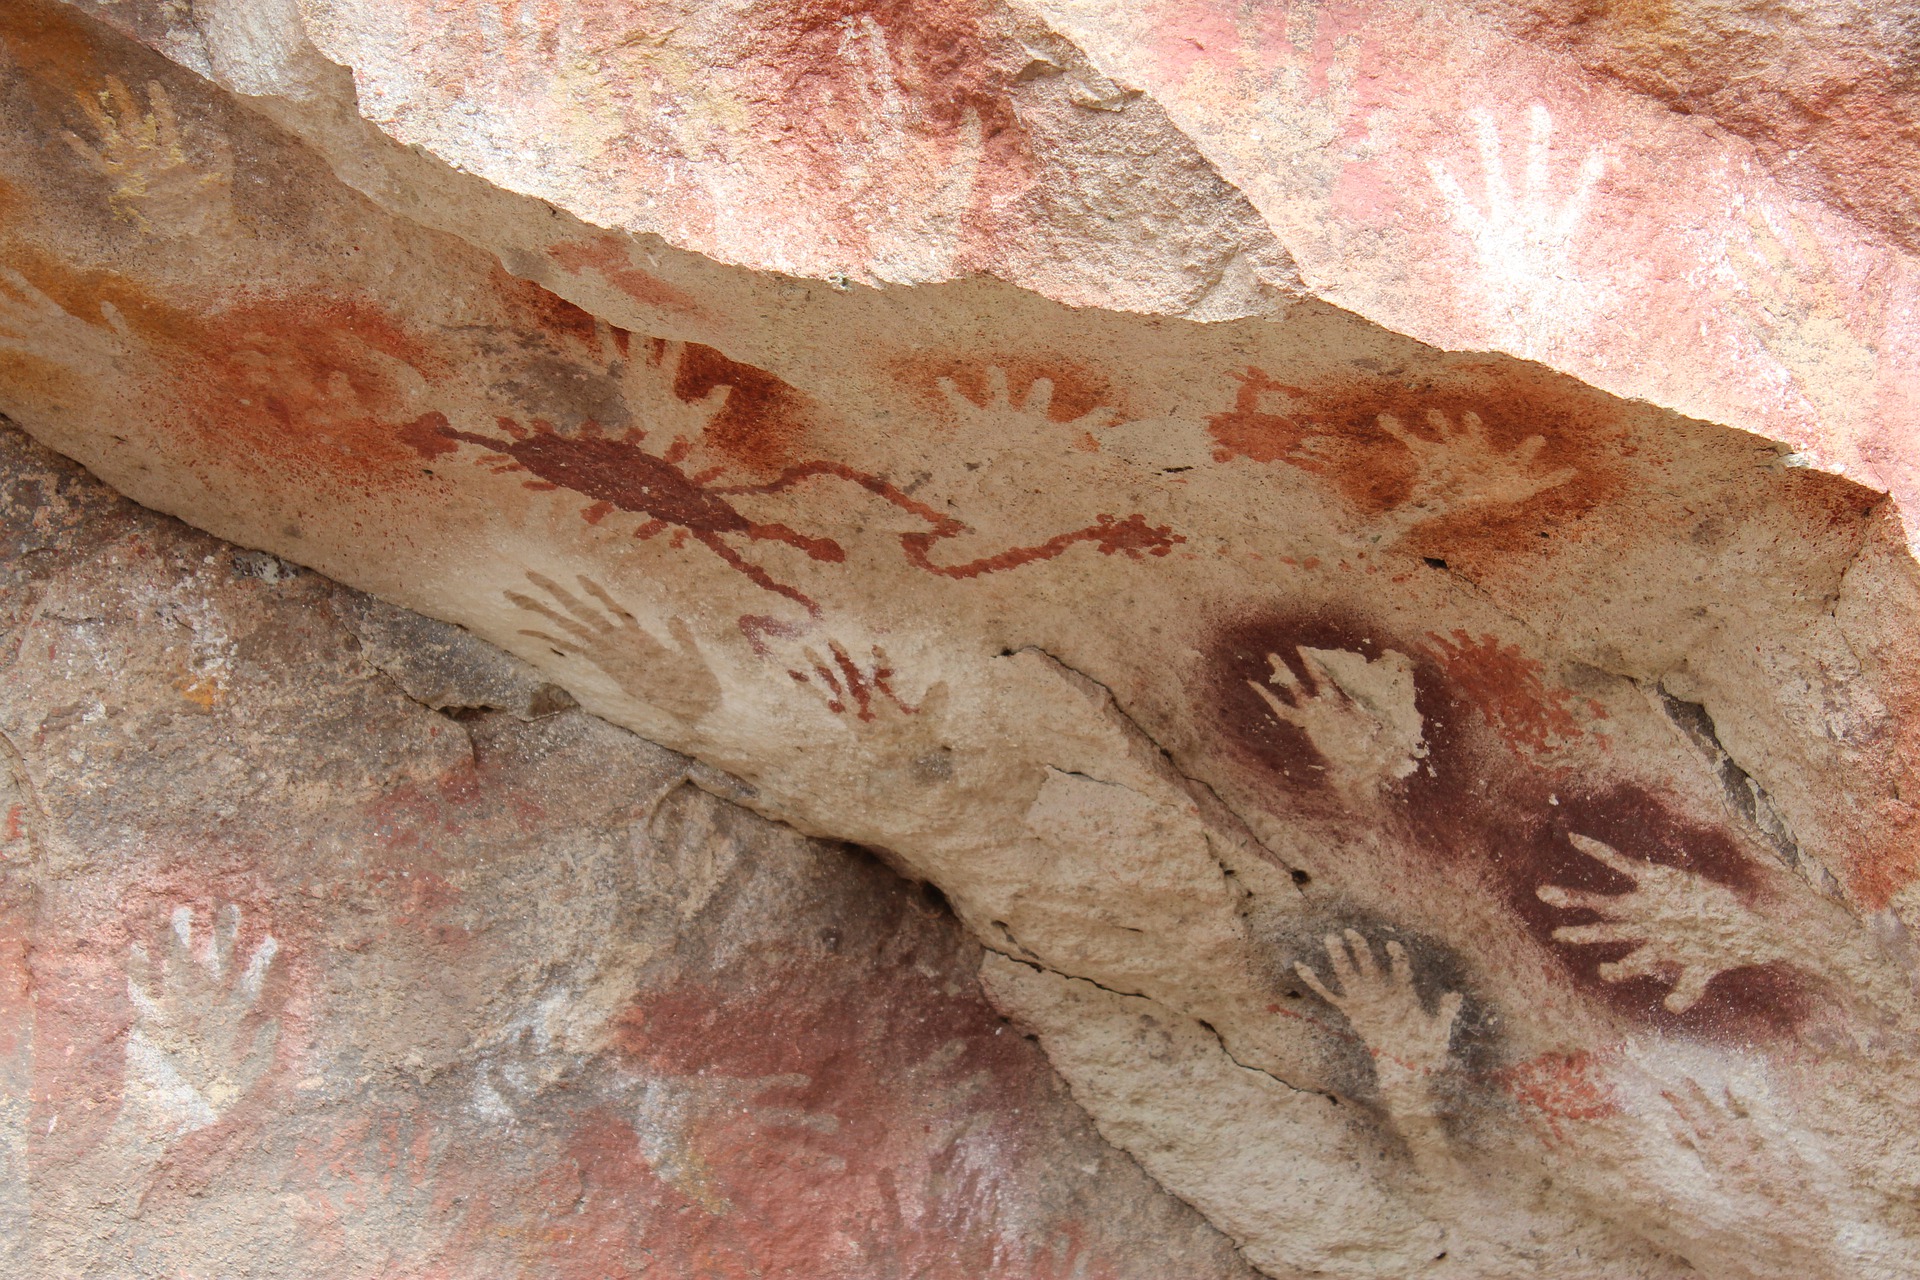 Image of cave art (royalty free)